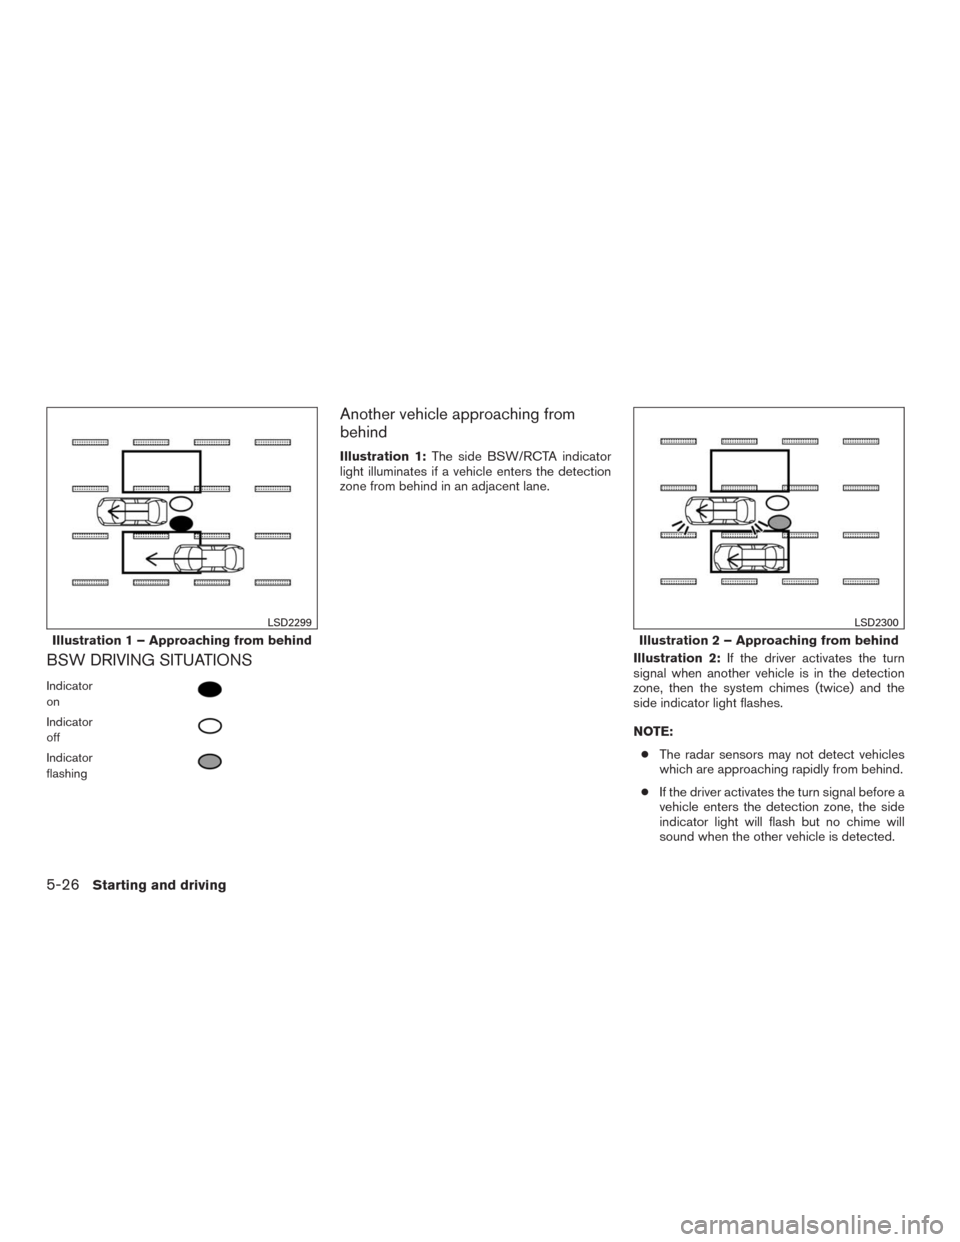 NISSAN MURANO 2016 3.G Owners Manual BSW DRIVING SITUATIONS
Indicator
on
Indicator
off
Indicator
flashing
Another vehicle approaching from
behind
Illustration 1:The side BSW/RCTA indicator
light illuminates if a vehicle enters the detect